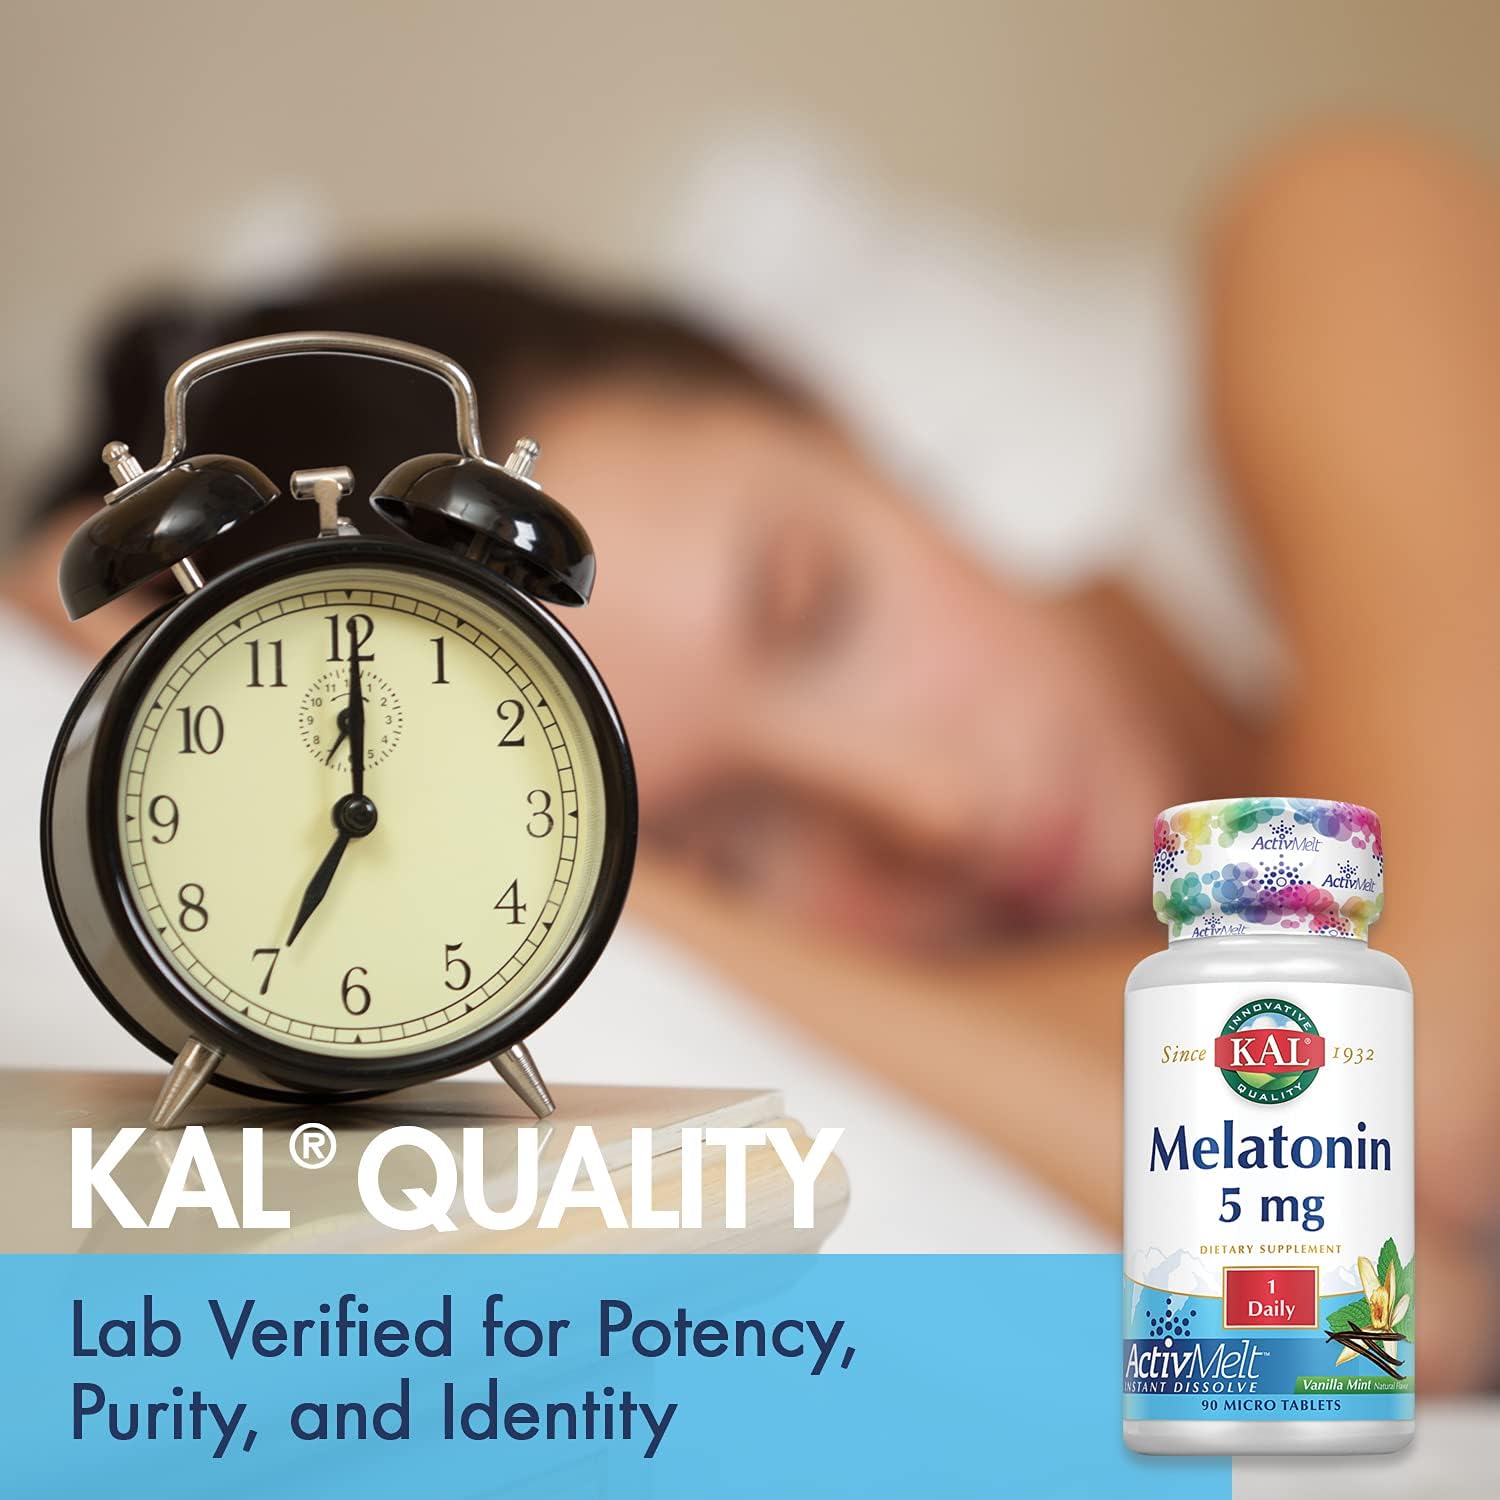 KAL Melatonin 5mg Sleep Aid, Melatonin Supplement Supports Calming Relaxation and a Healthy Sleep Cycle, Fast Dissolving ActivMelts, Natural Vanilla Mint Flavor, Vegetarian, 90 Serv, 90 Micro Tablets : Health & Household